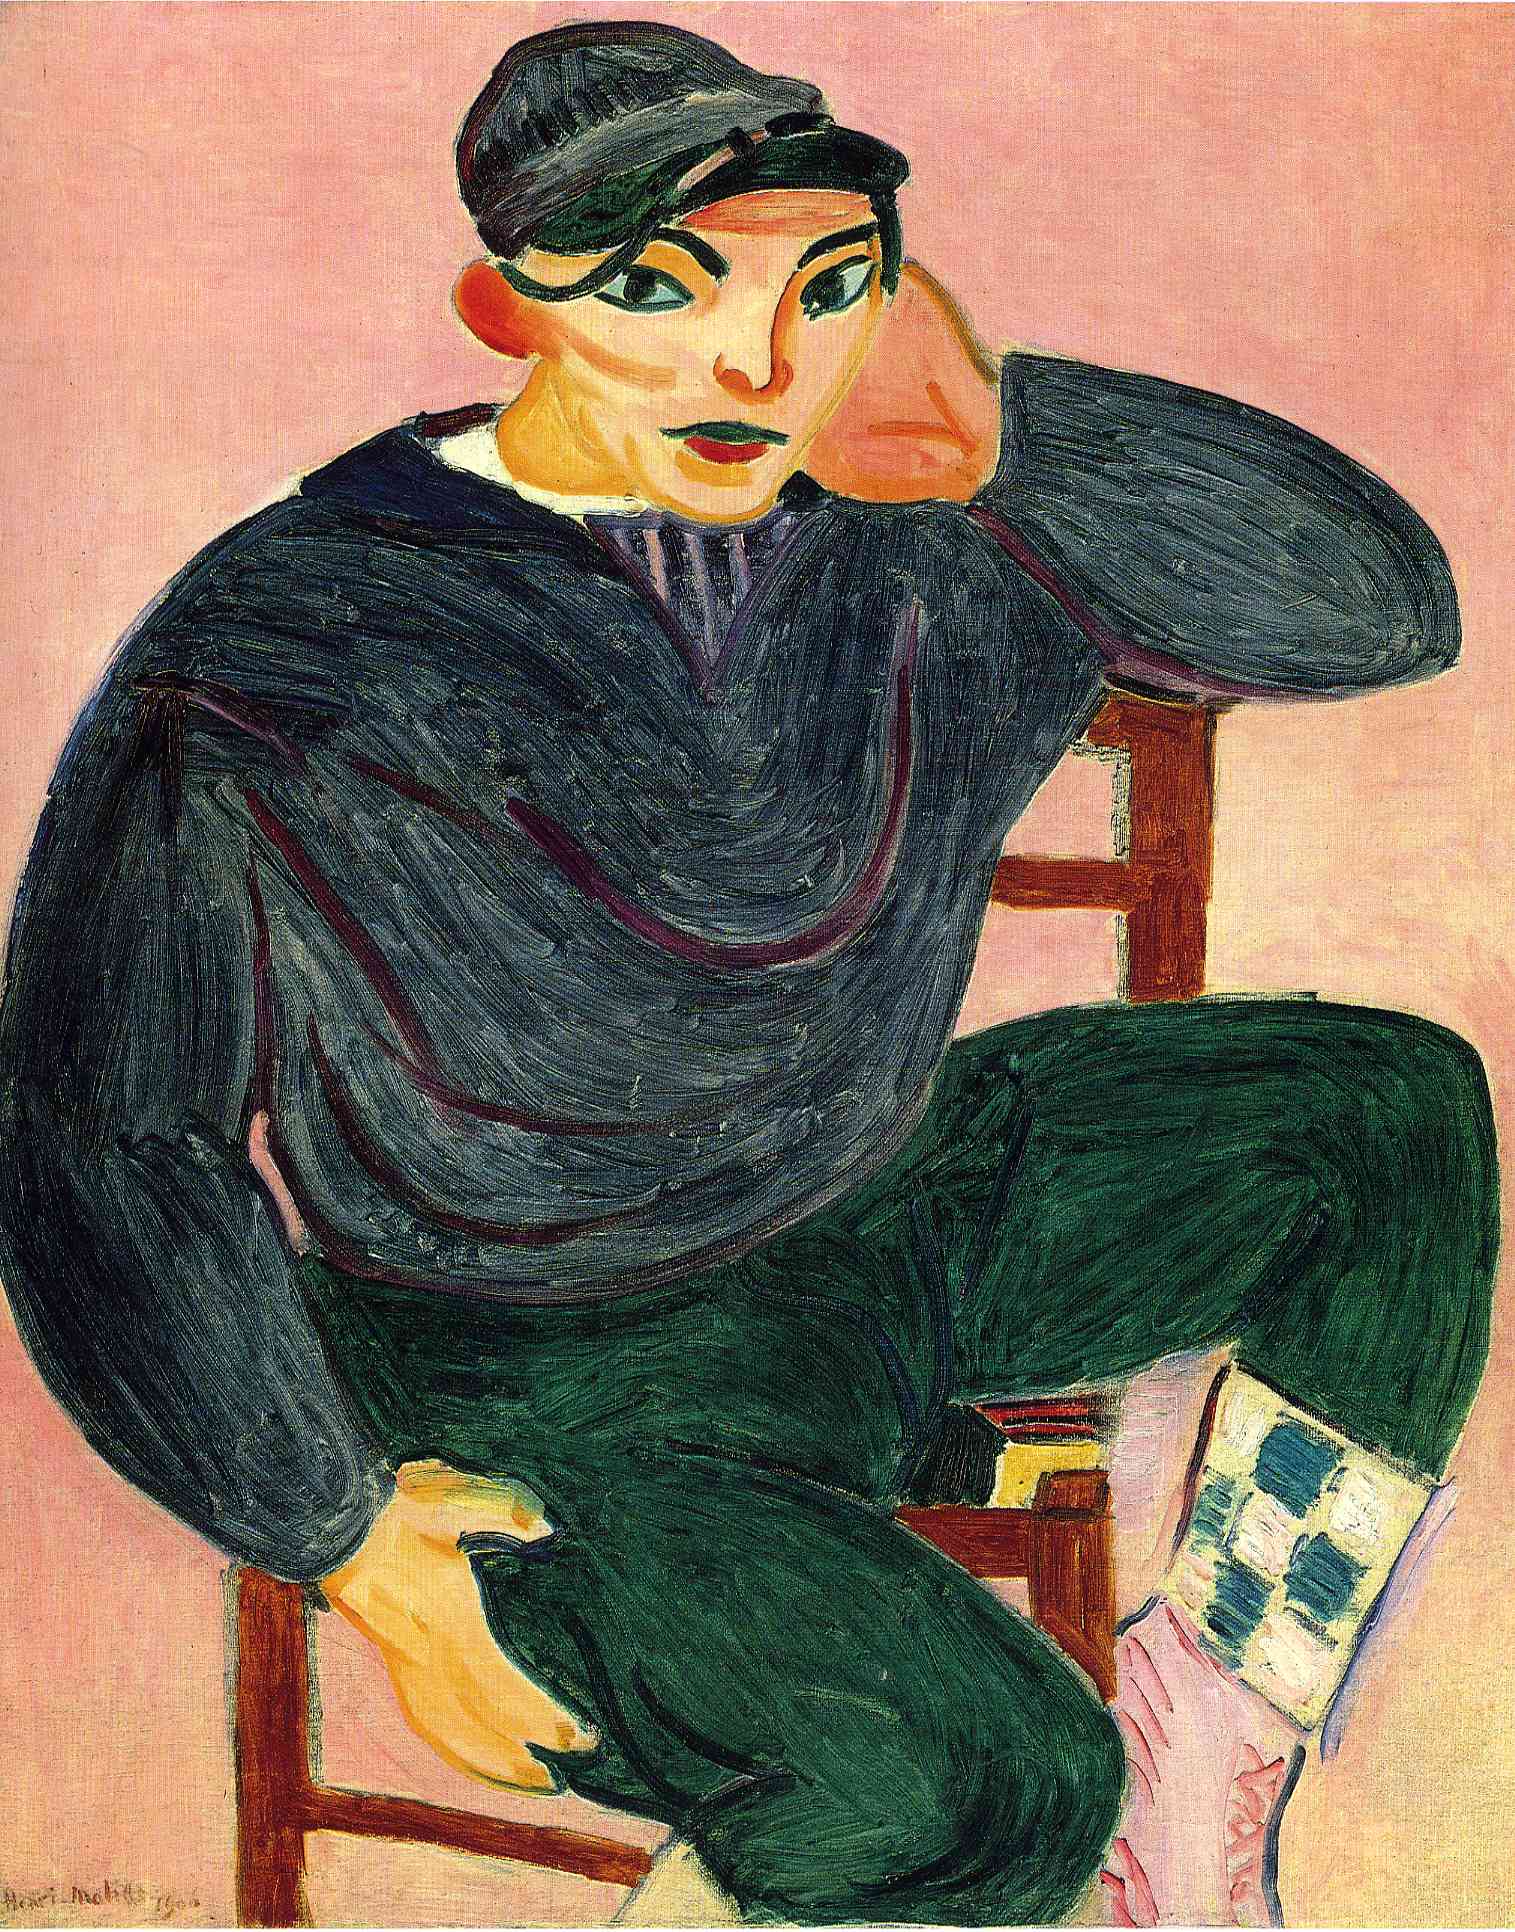 The Young Sailor II by Henri Matisse - 1906 - 100 x 81 cm private collection